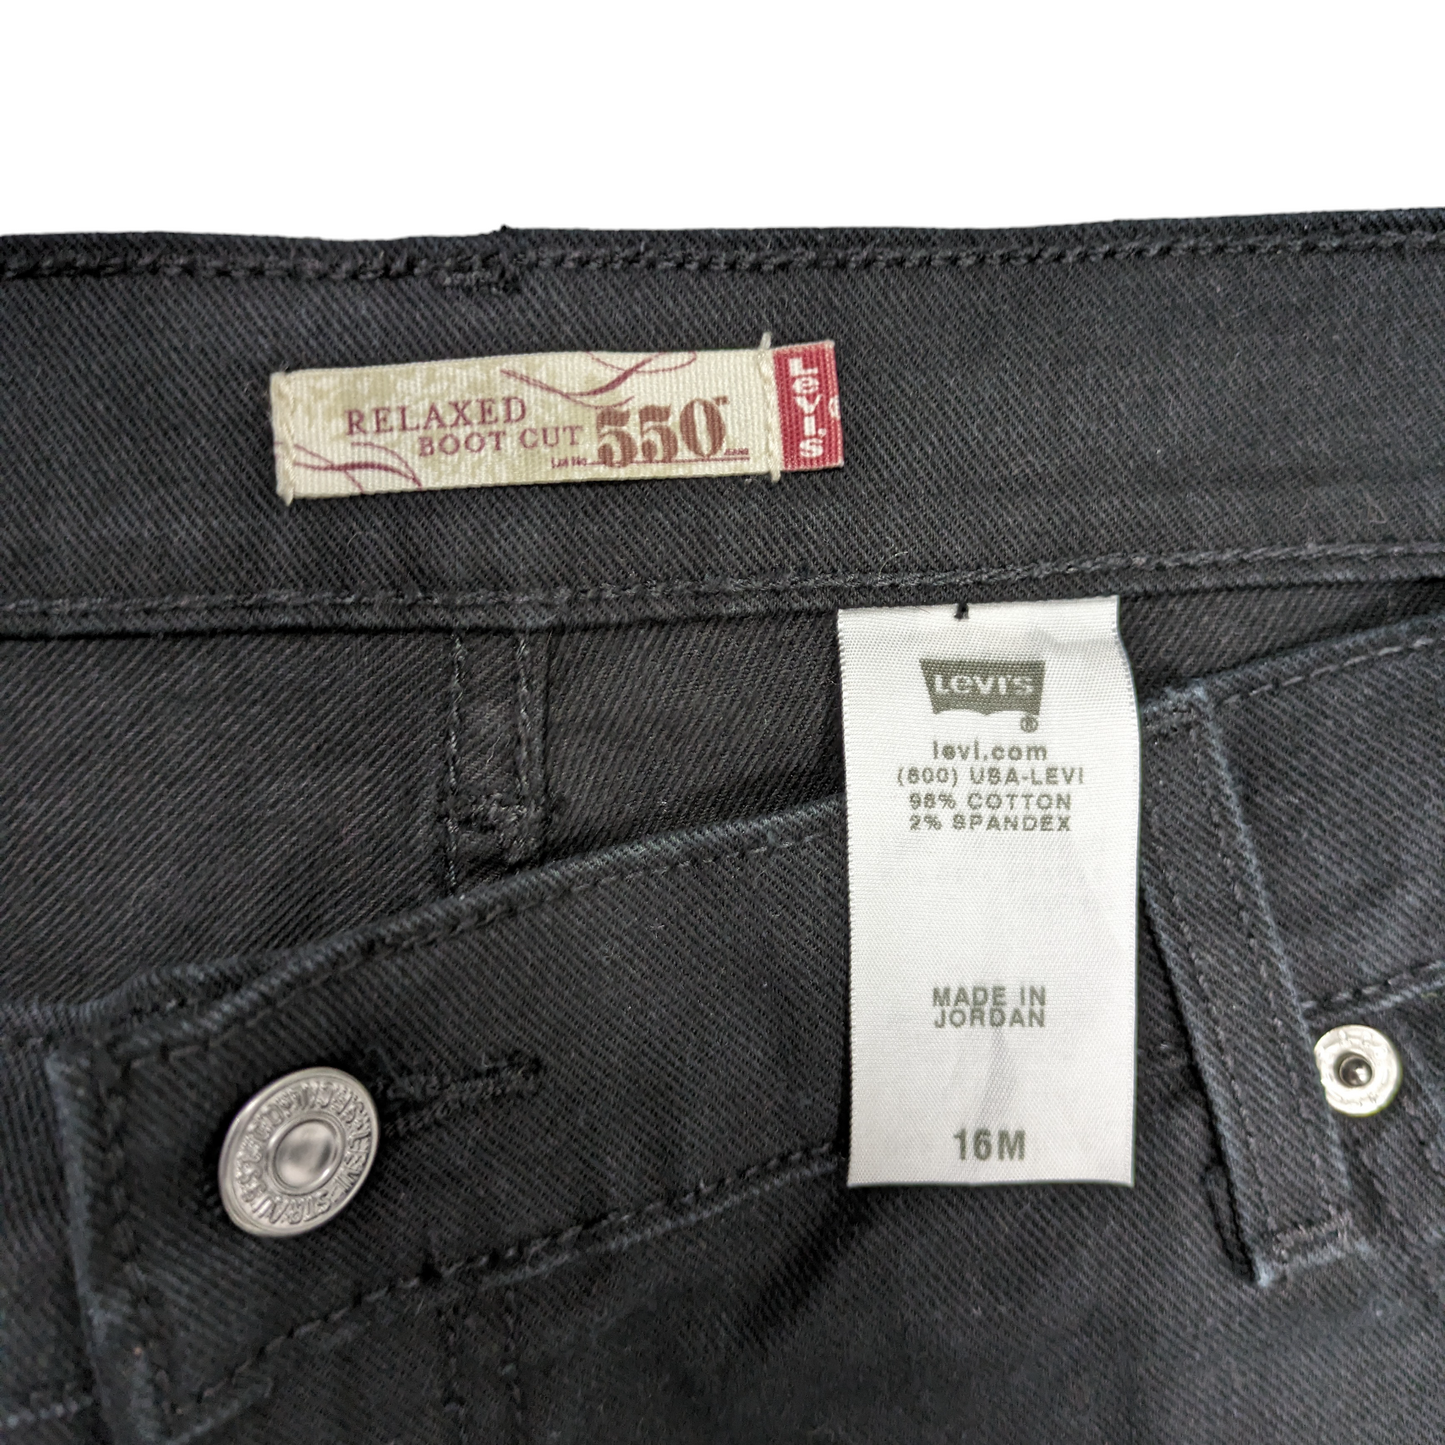 Levi's 550 Relaxed Bootcut Jeans Size UK 18